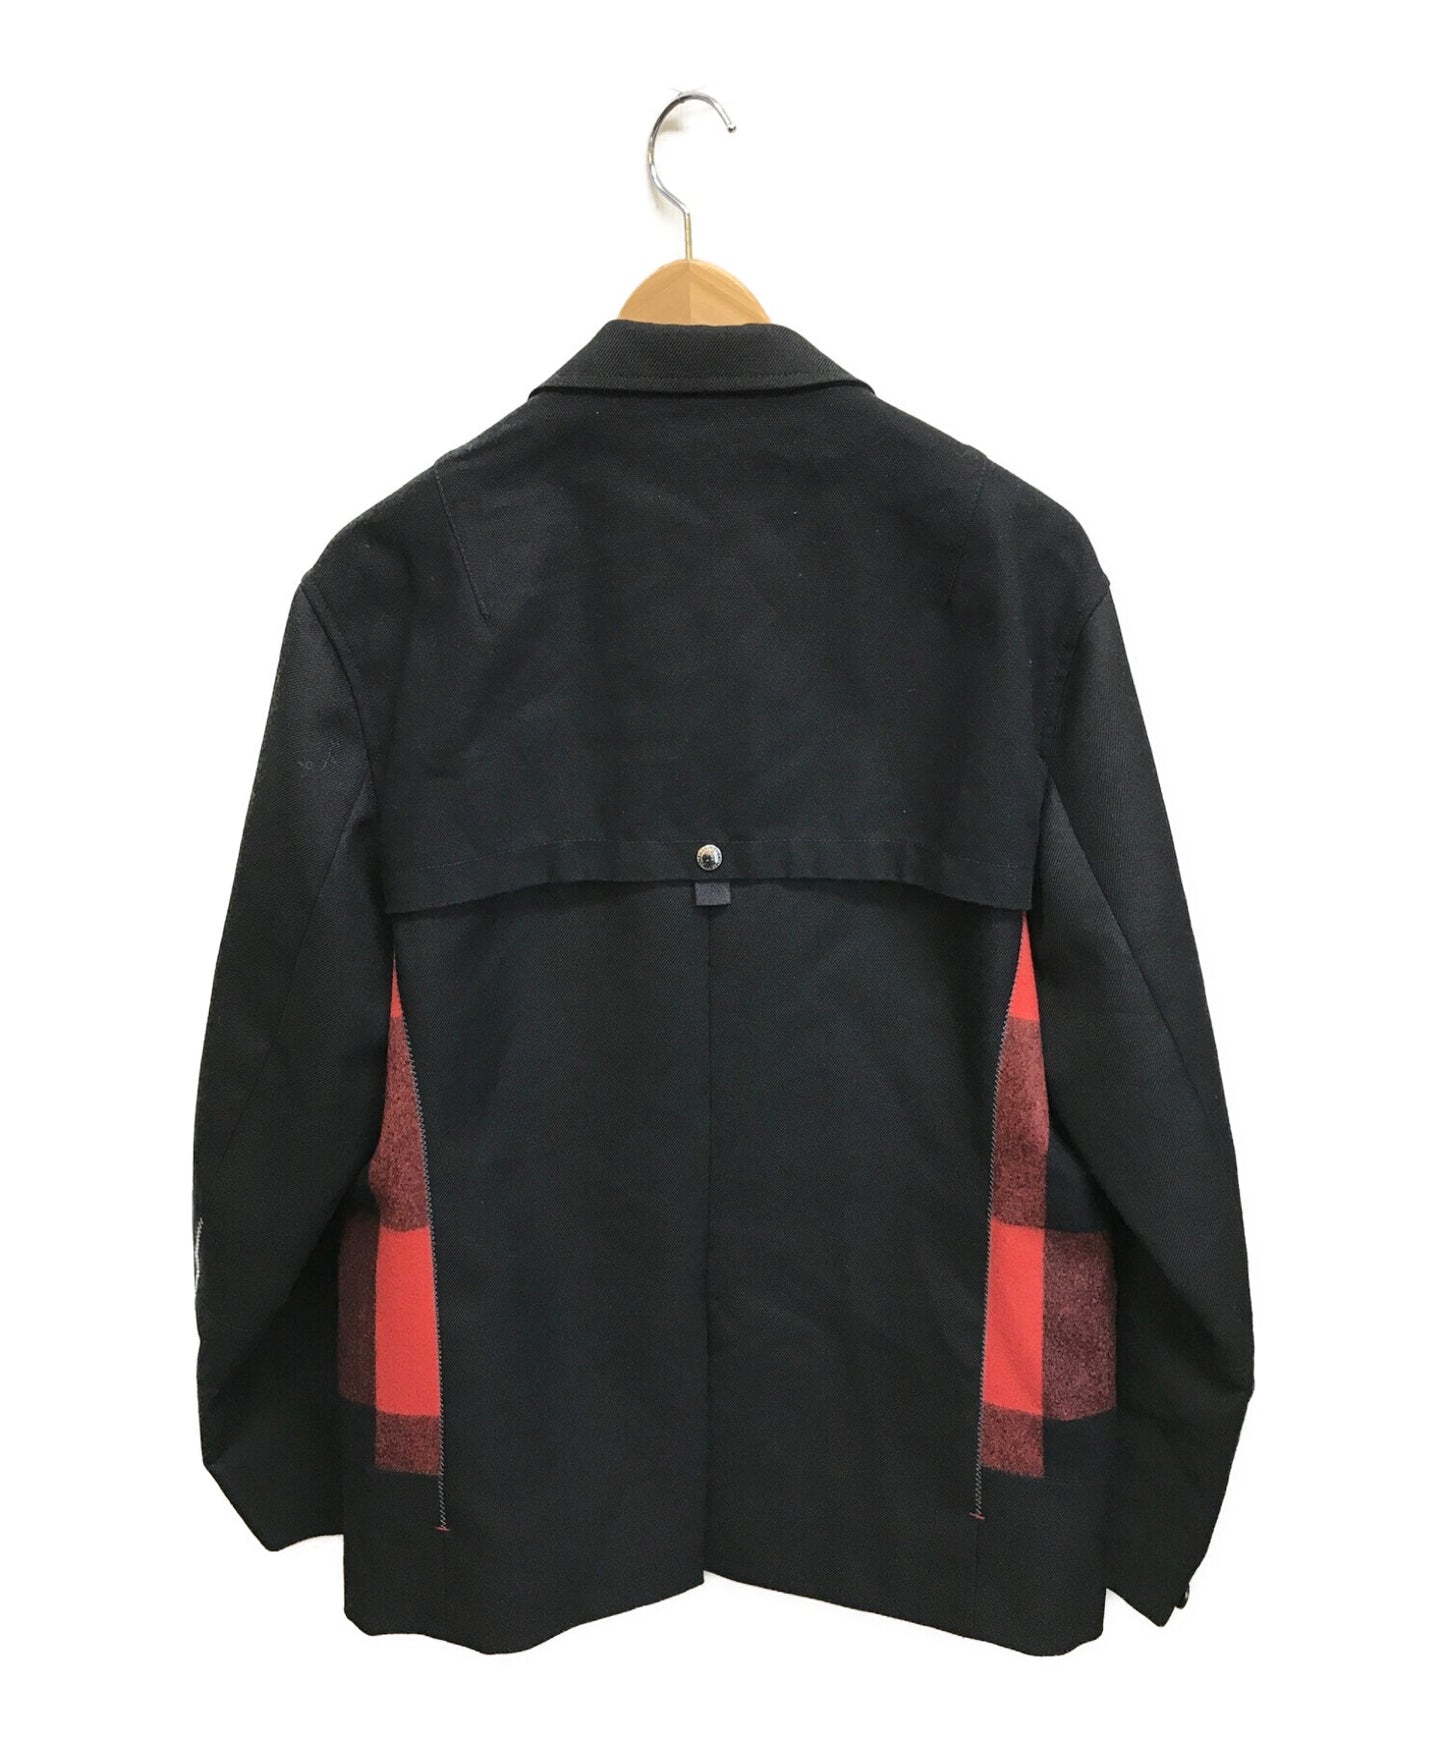 Comme des Garcons Junya Watanabe Man Wool Surge Duck-Switched Check Jacket AD2021 WH-J006